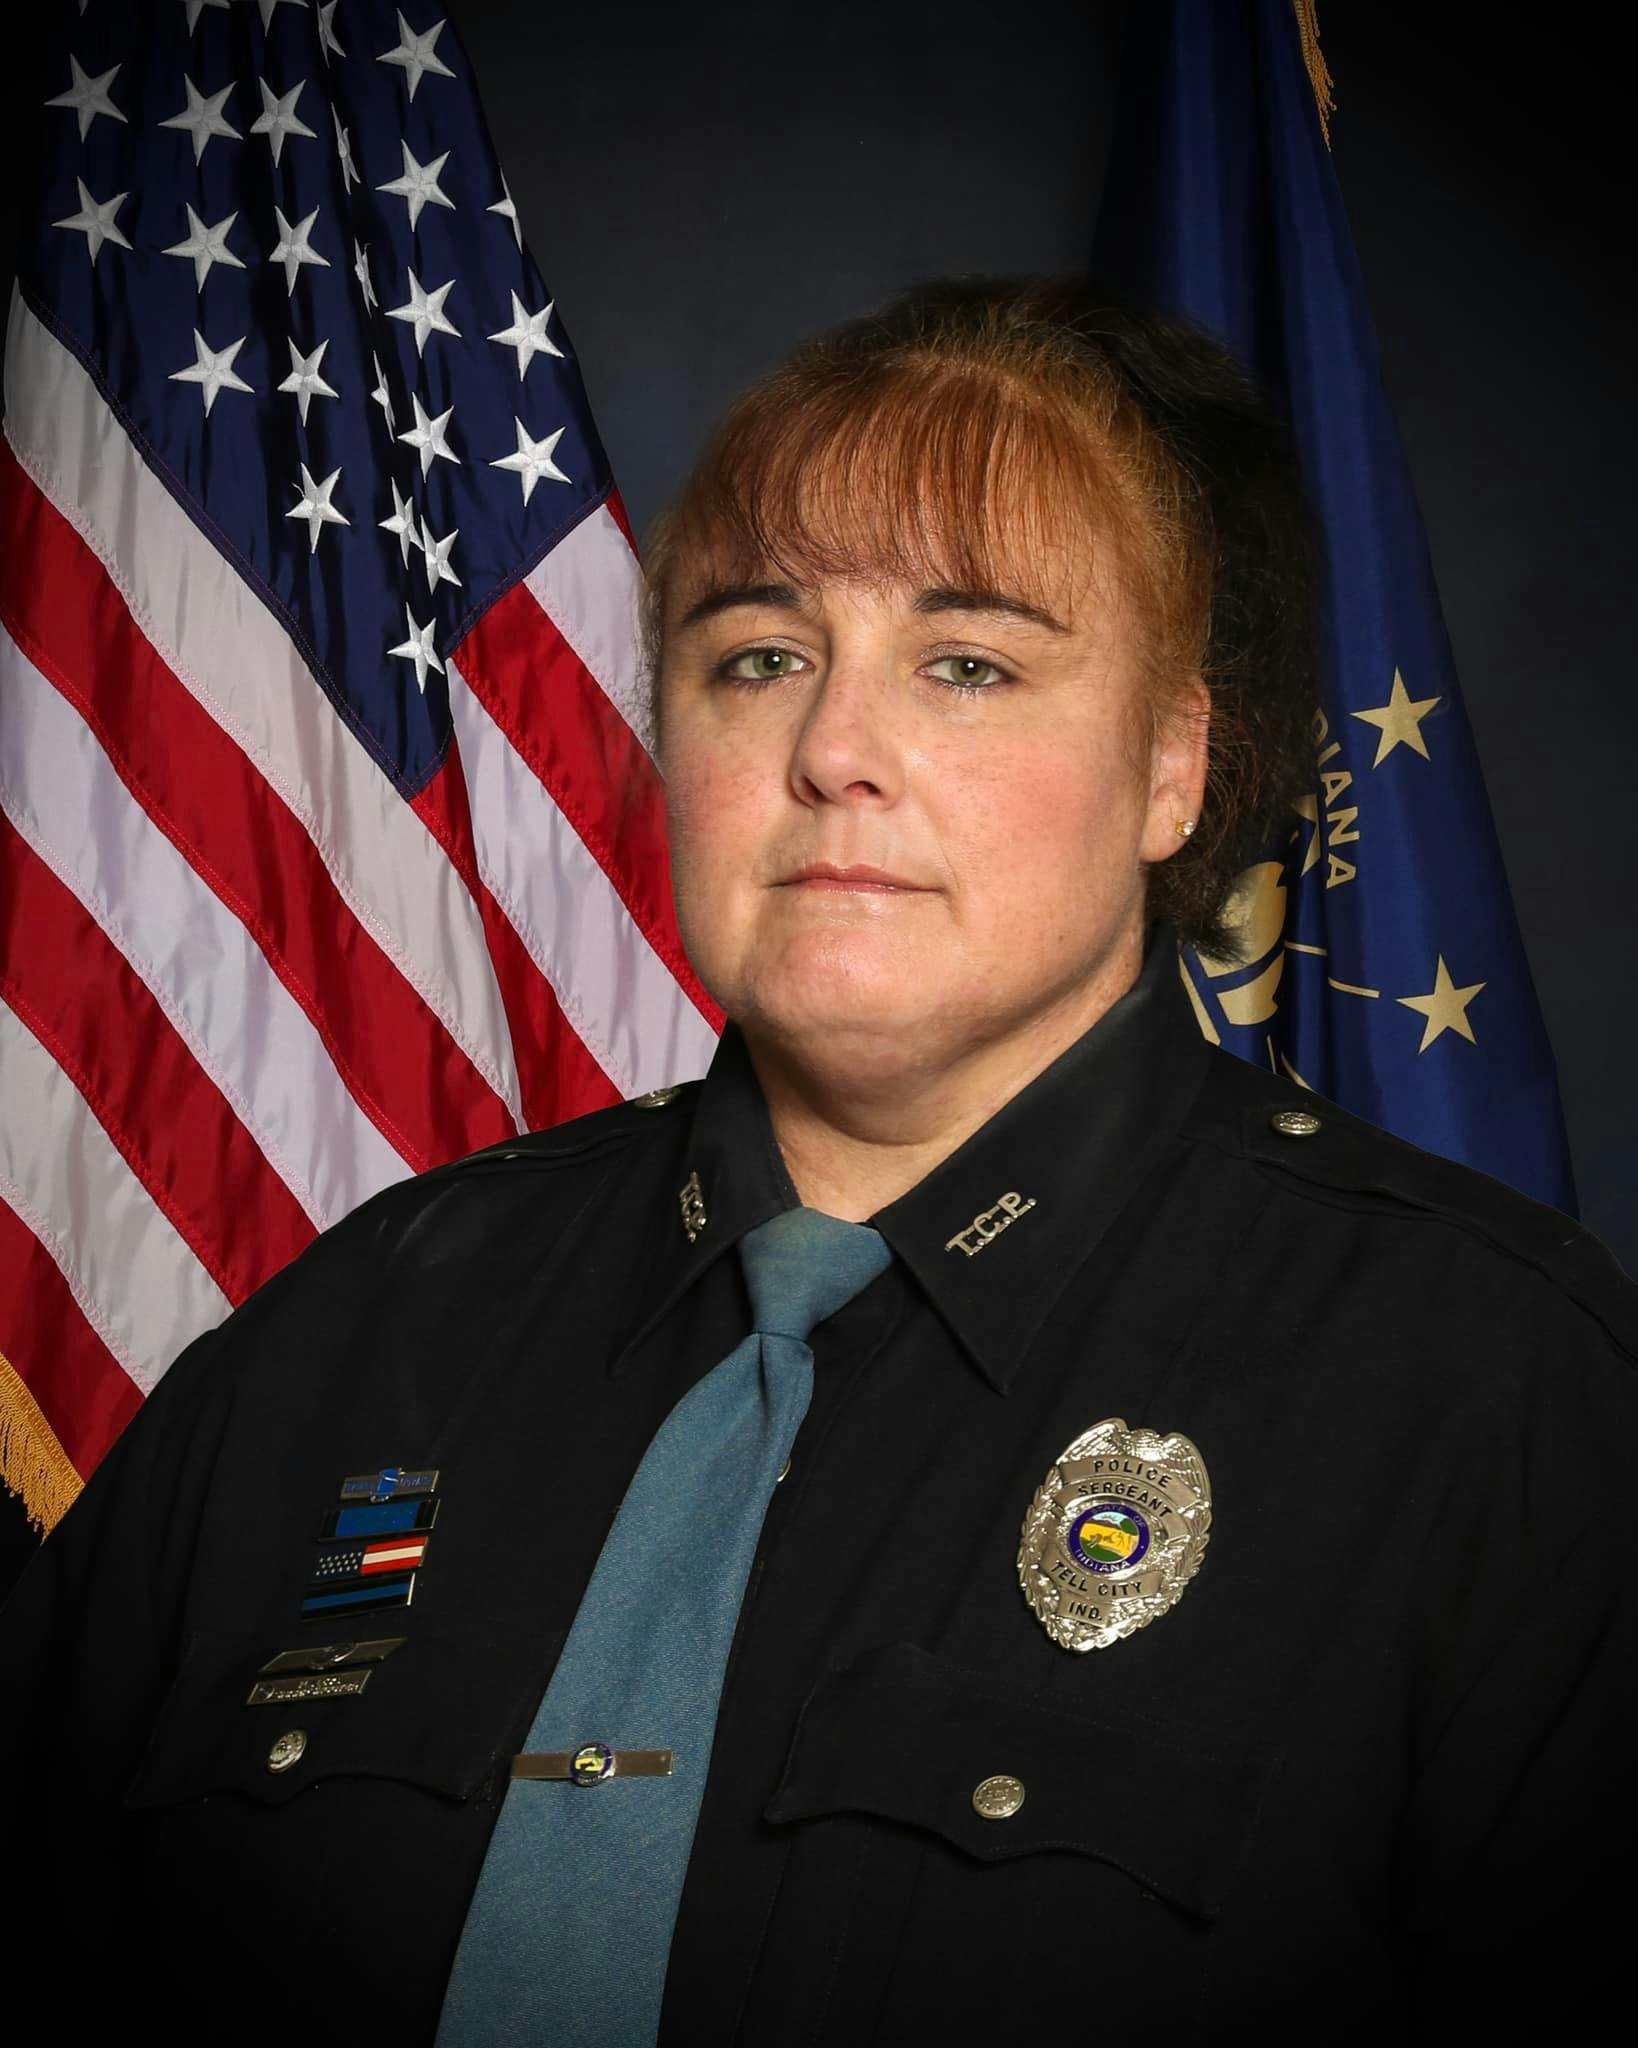 Sgt. Heather Glenn spent nearly 20 years in law enforcement. (Photo: Tell City police department)